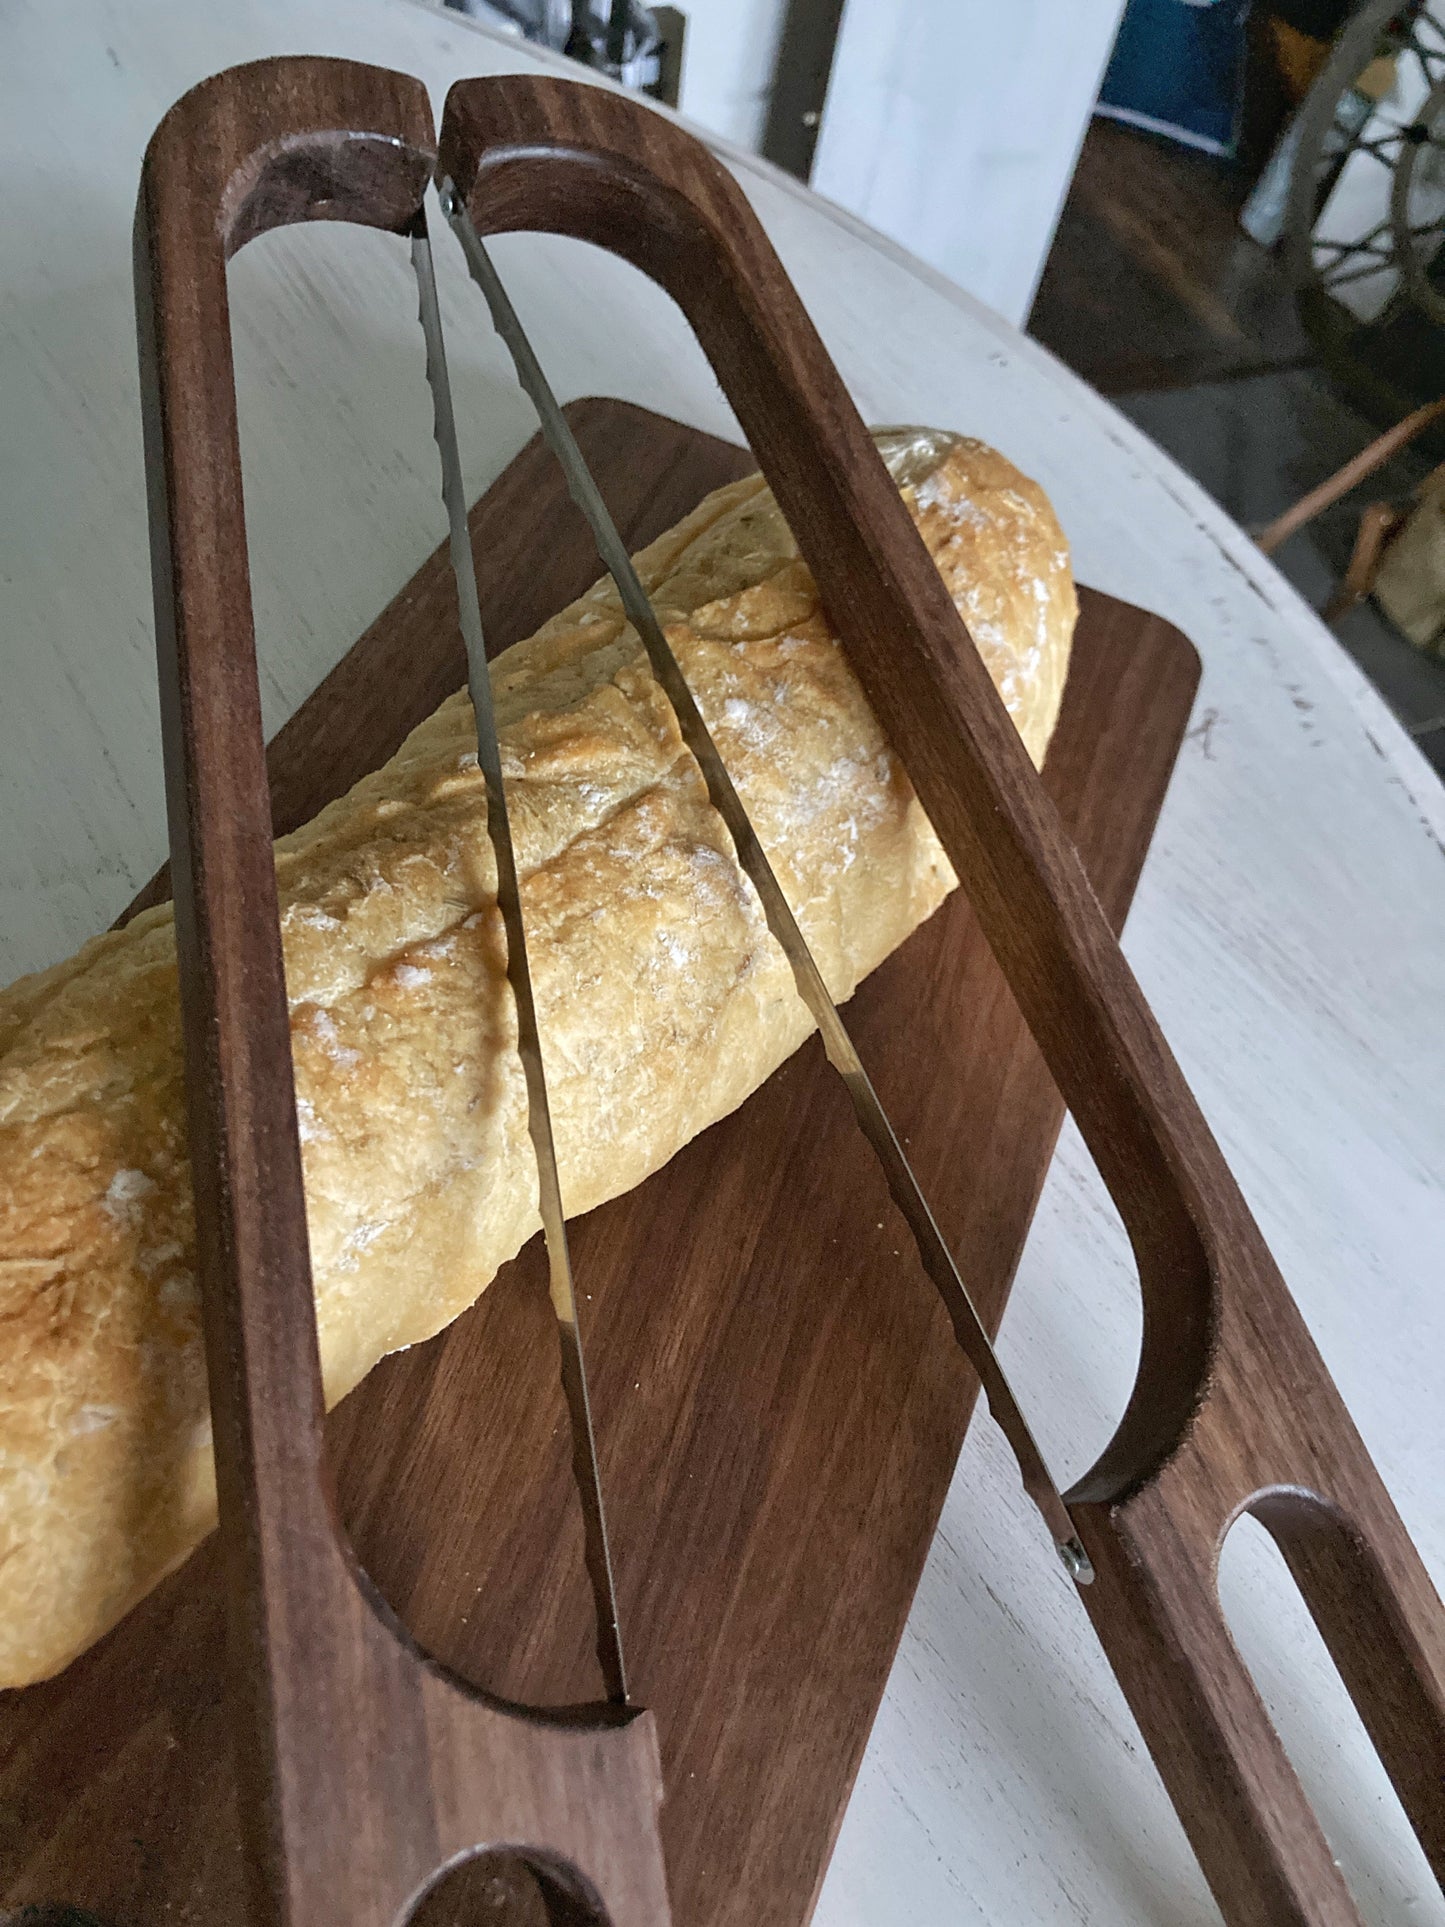 Solid walnut 2 foot long cutting board with a long oval shaped cutout handle. The matching bow cutting knife (in a left or right handed option) makes cutiing bread easy and the set beautiful when not in use. Use as a bread board or charcuterie board